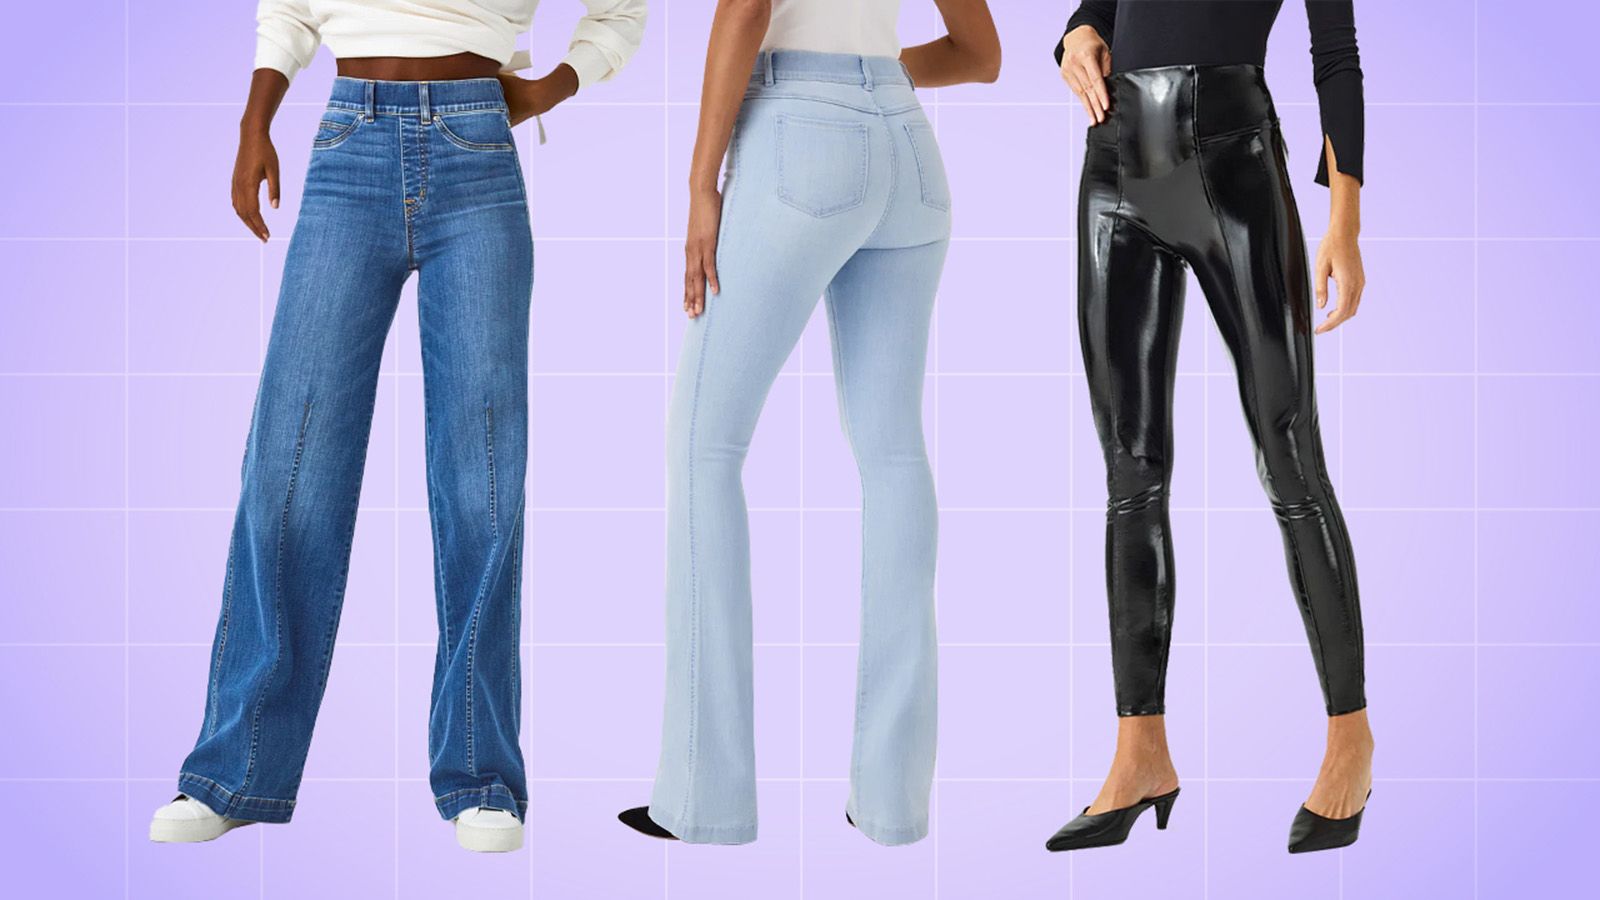 Spanx Cyber Monday Sale Is Still Here: Save On the Celeb-Loved